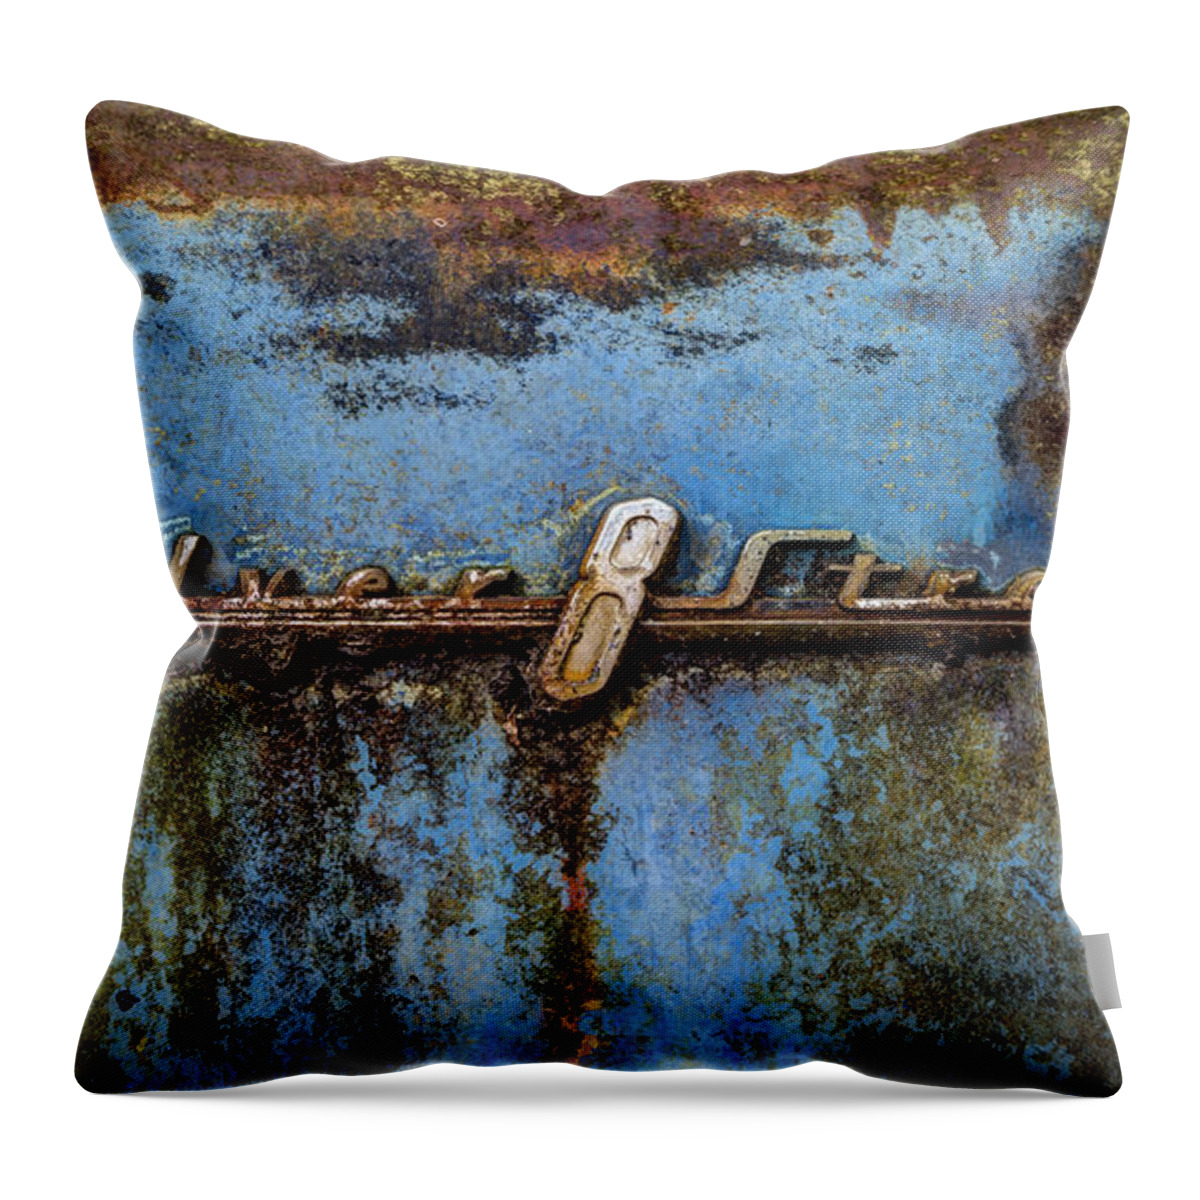 1950 Throw Pillow featuring the photograph Silver Streak by Debra and Dave Vanderlaan